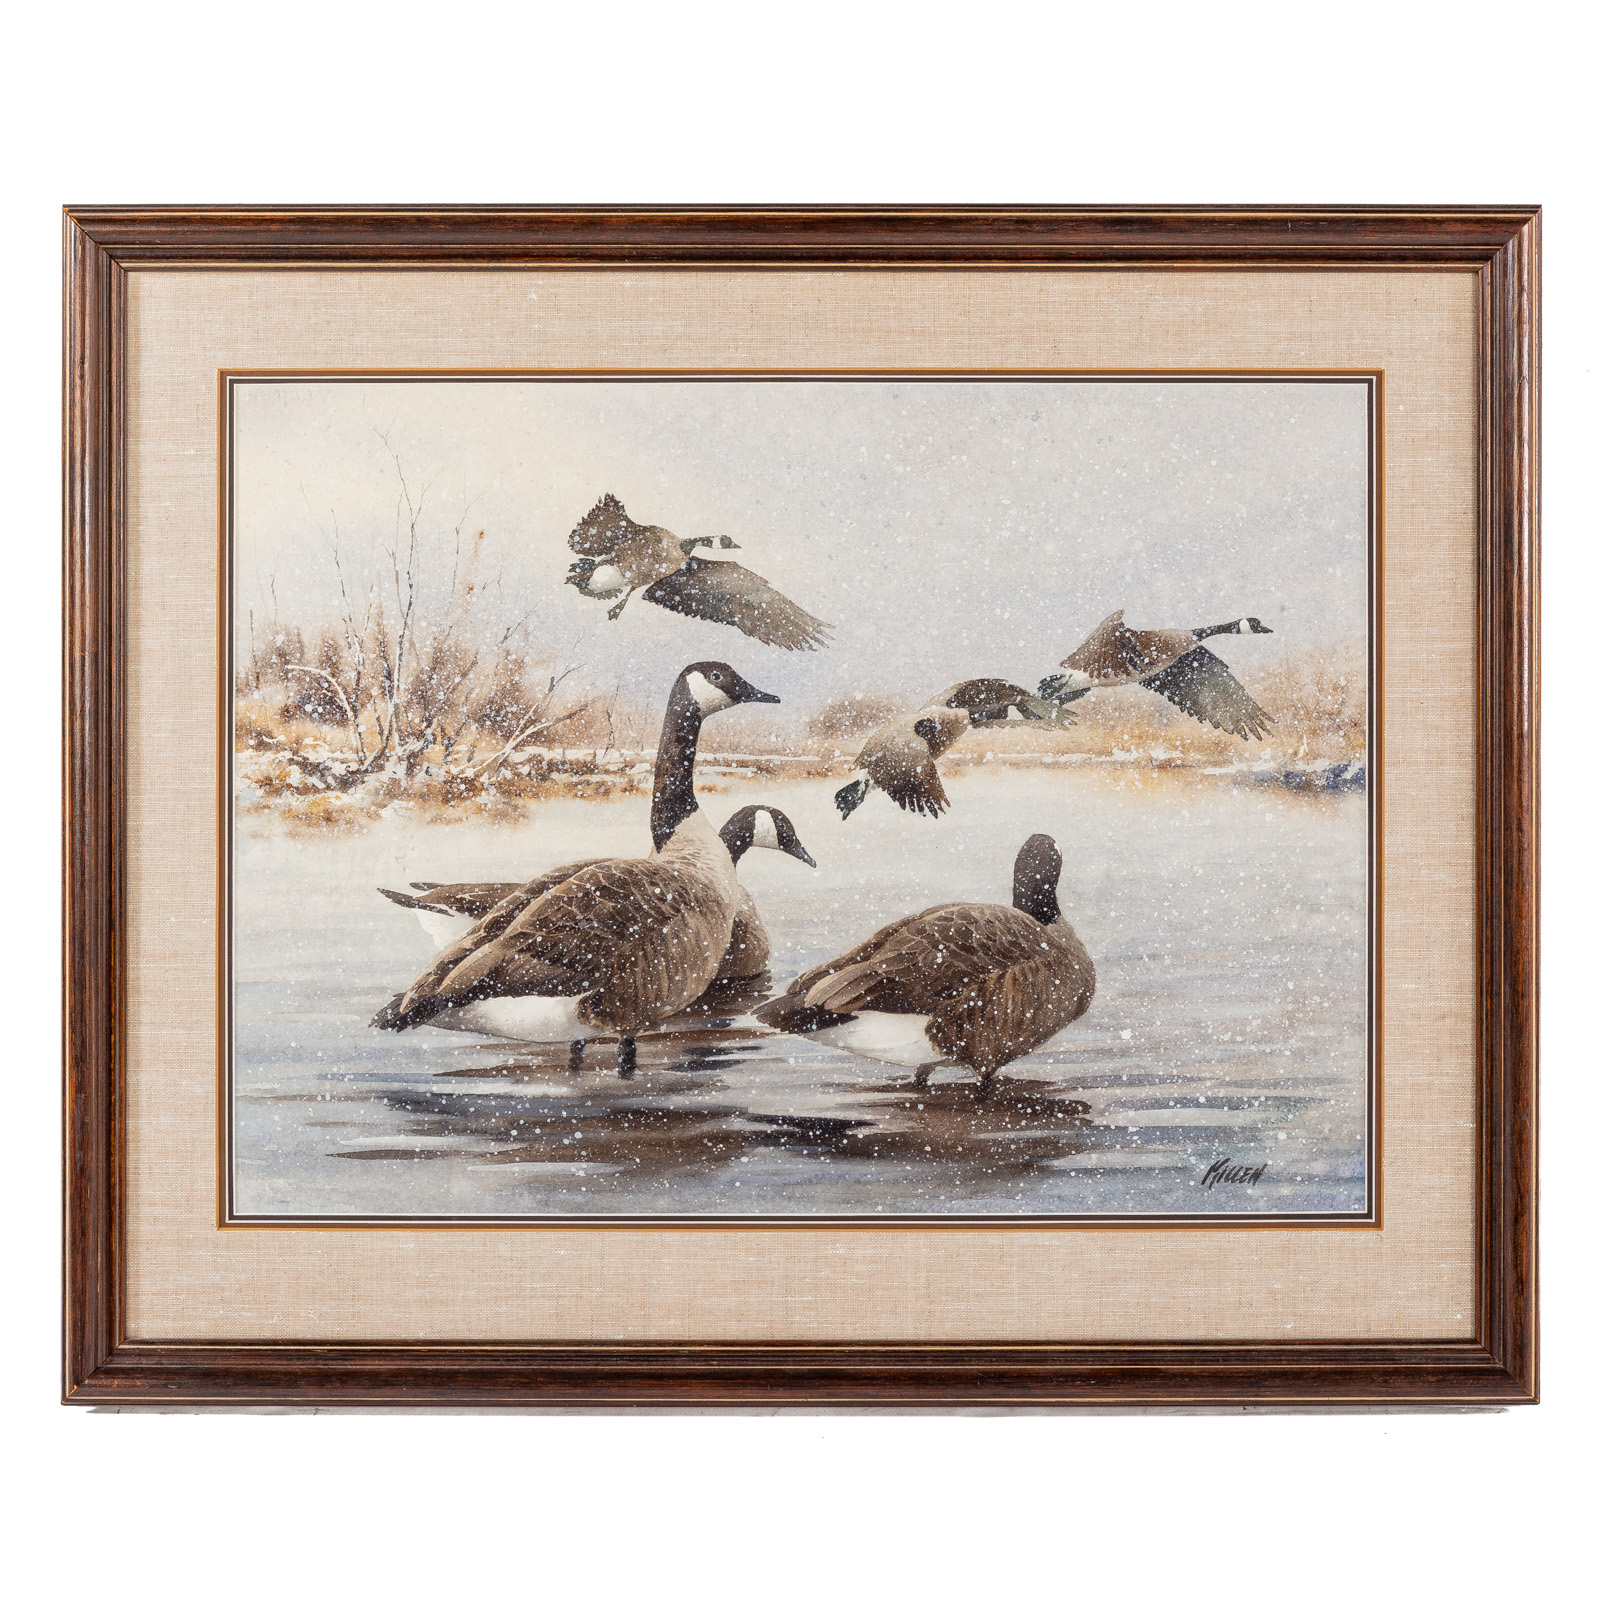 JAMES KILLEN. GEESE IN THE SNOW,